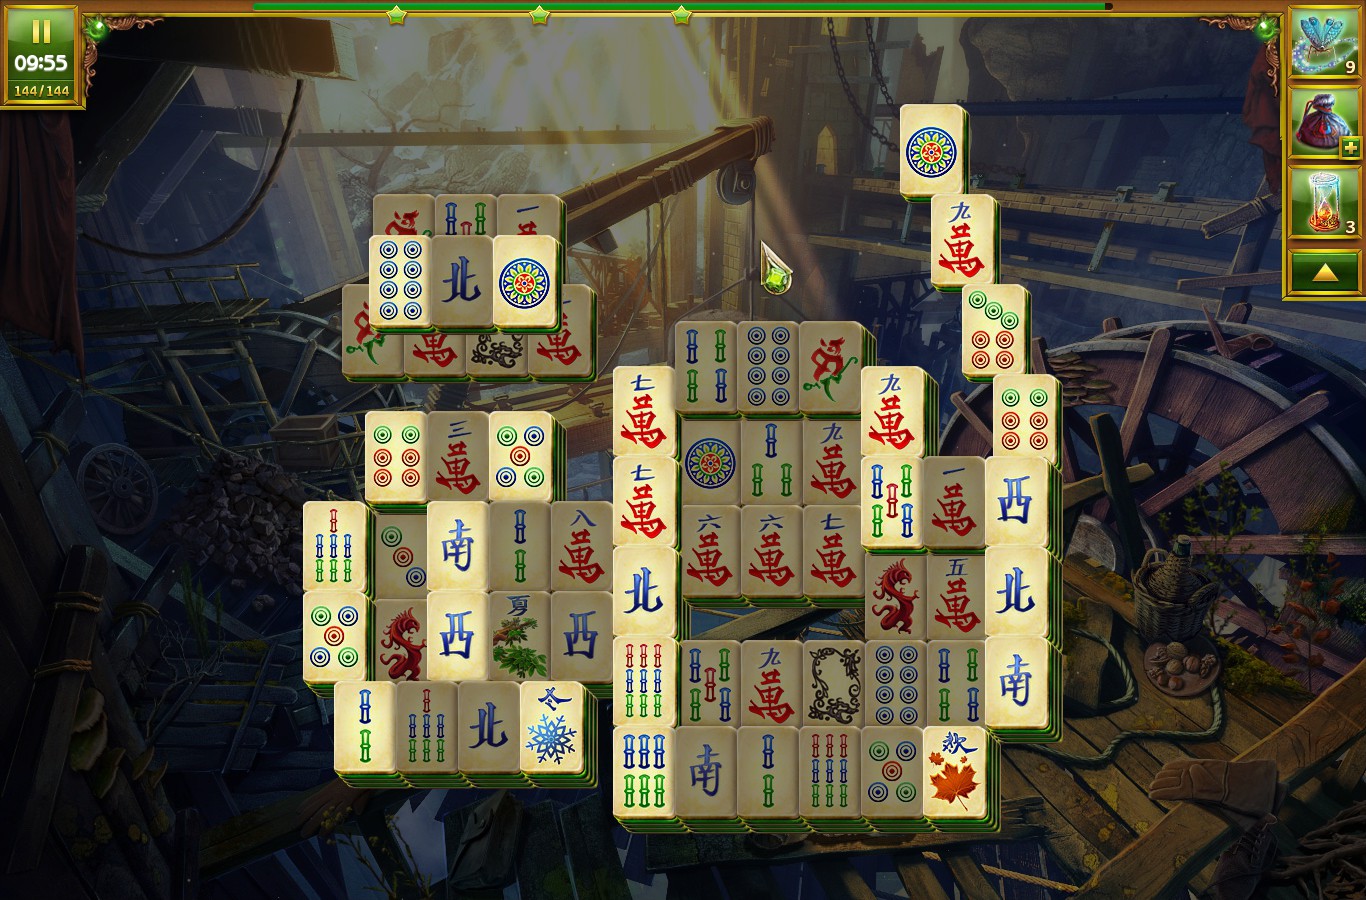 Lost Lands: Mahjong for ipod download